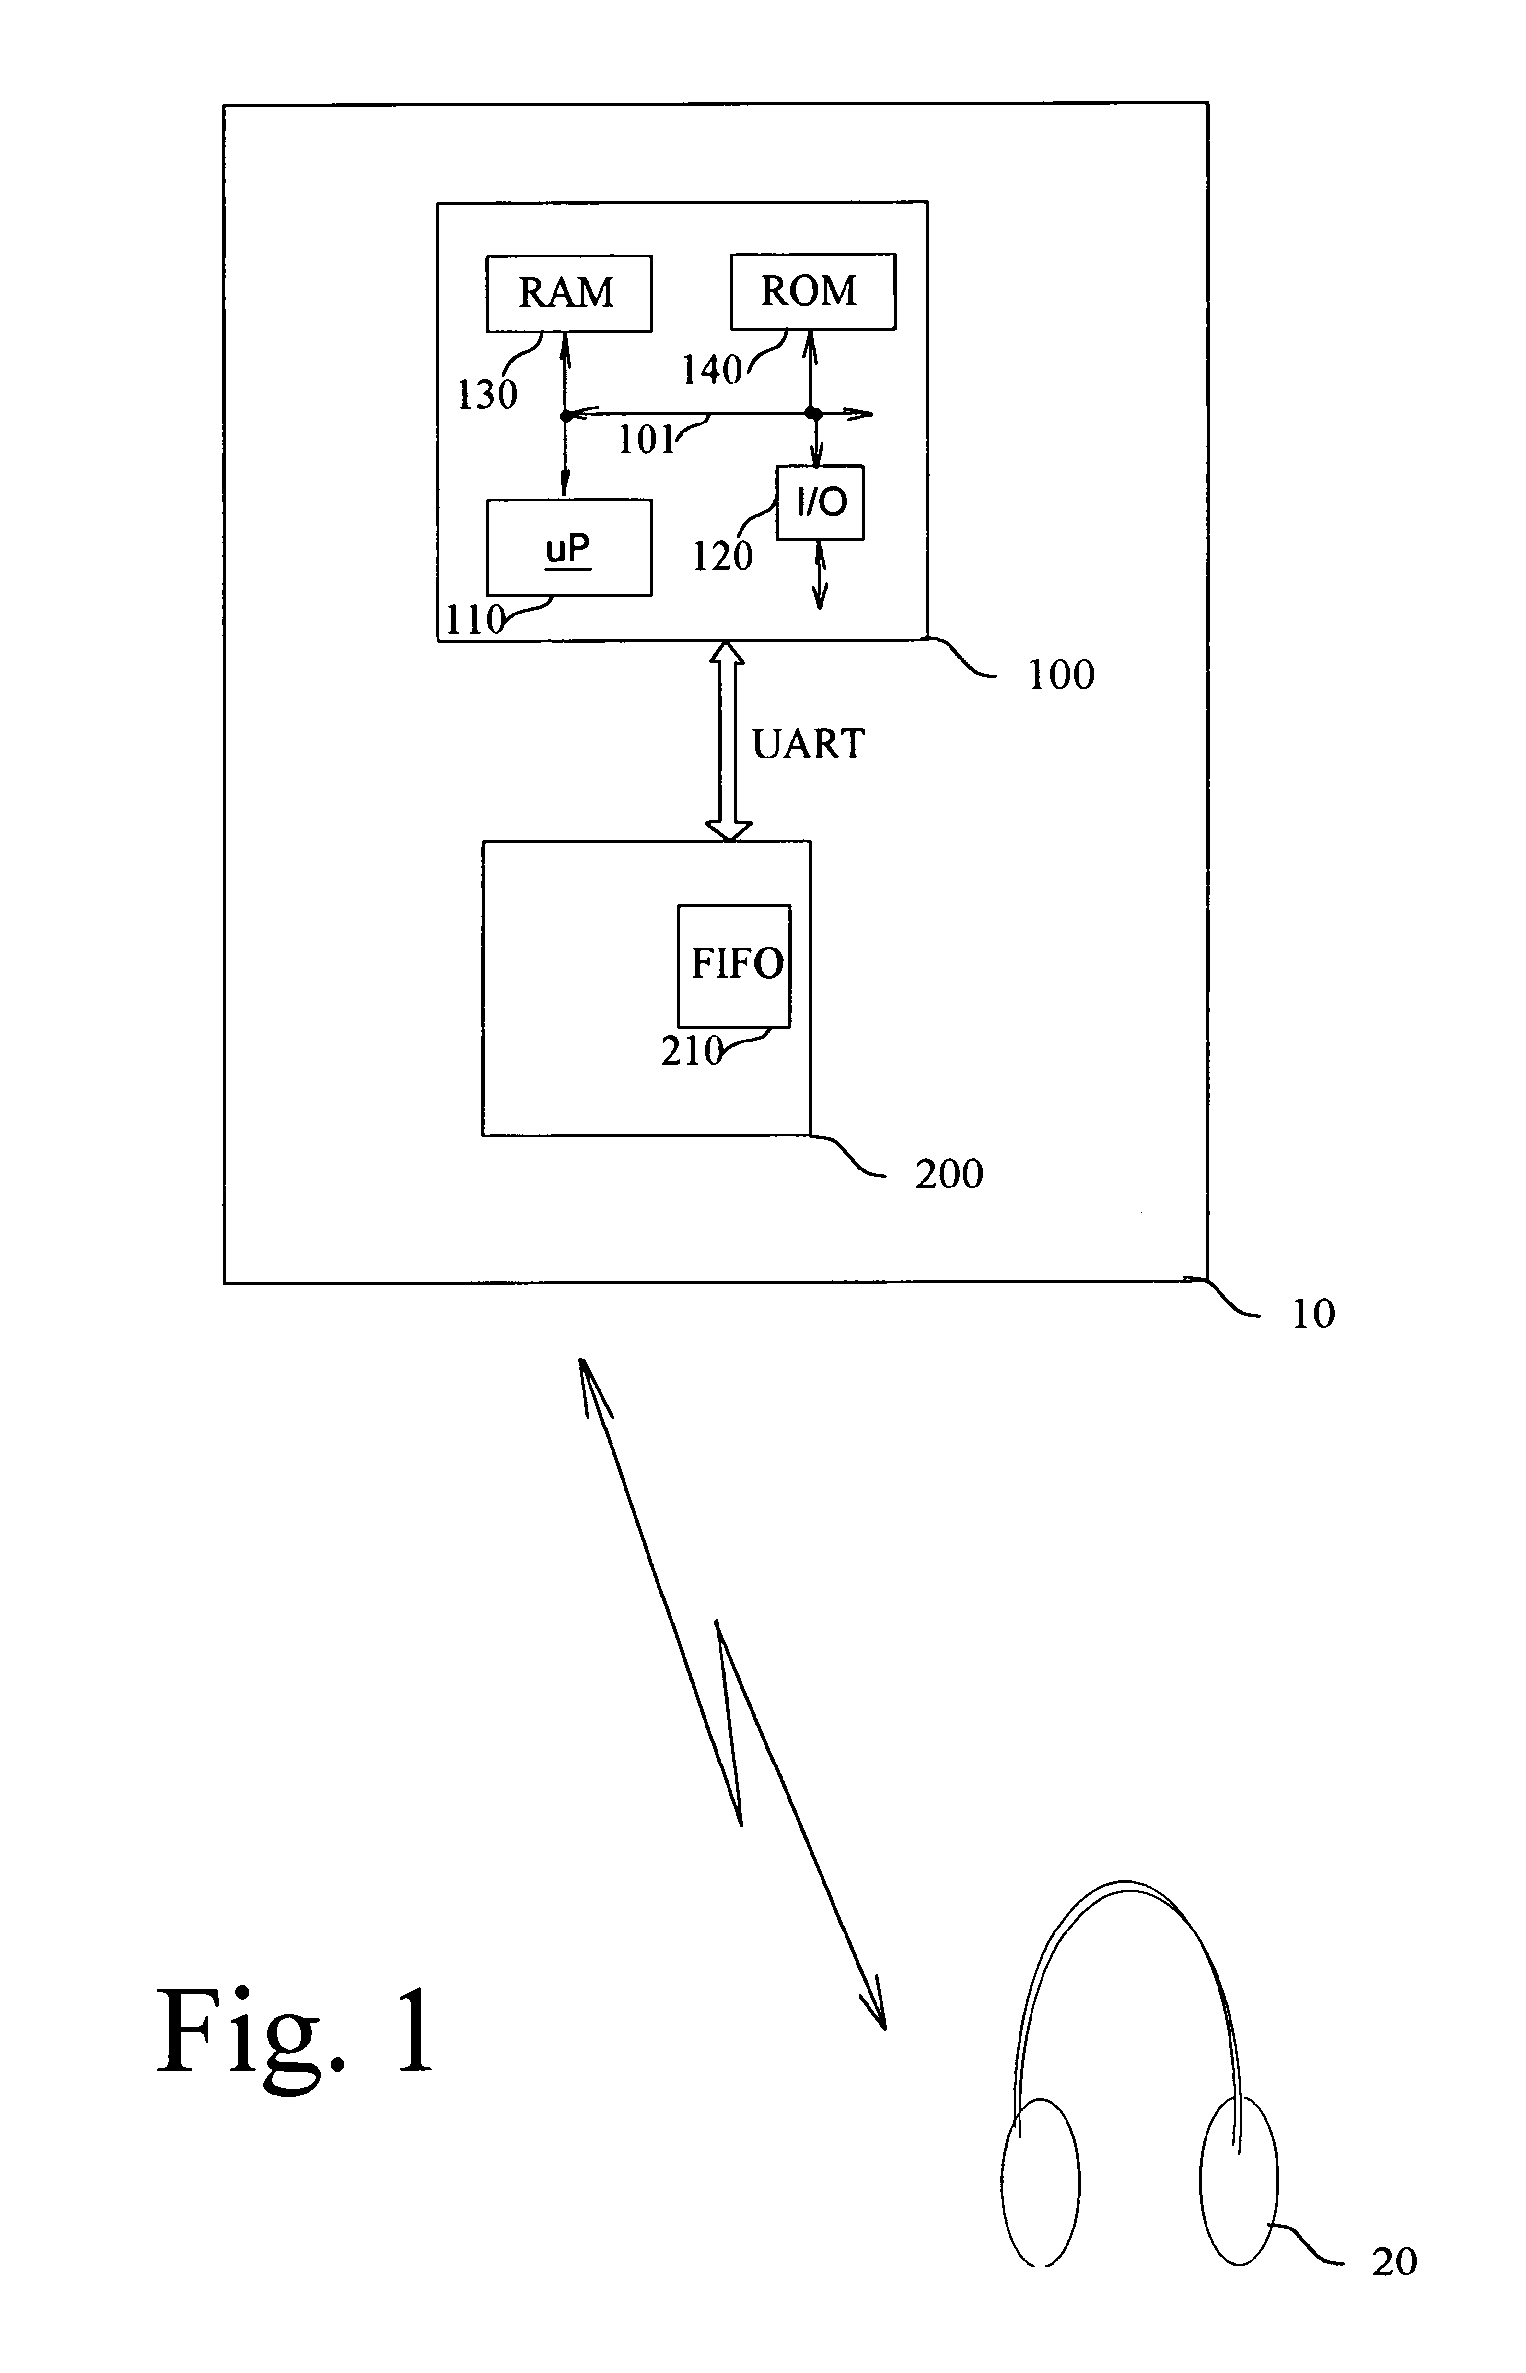 Process of audio data exchanges of information between a central unit and a bluetooth controller